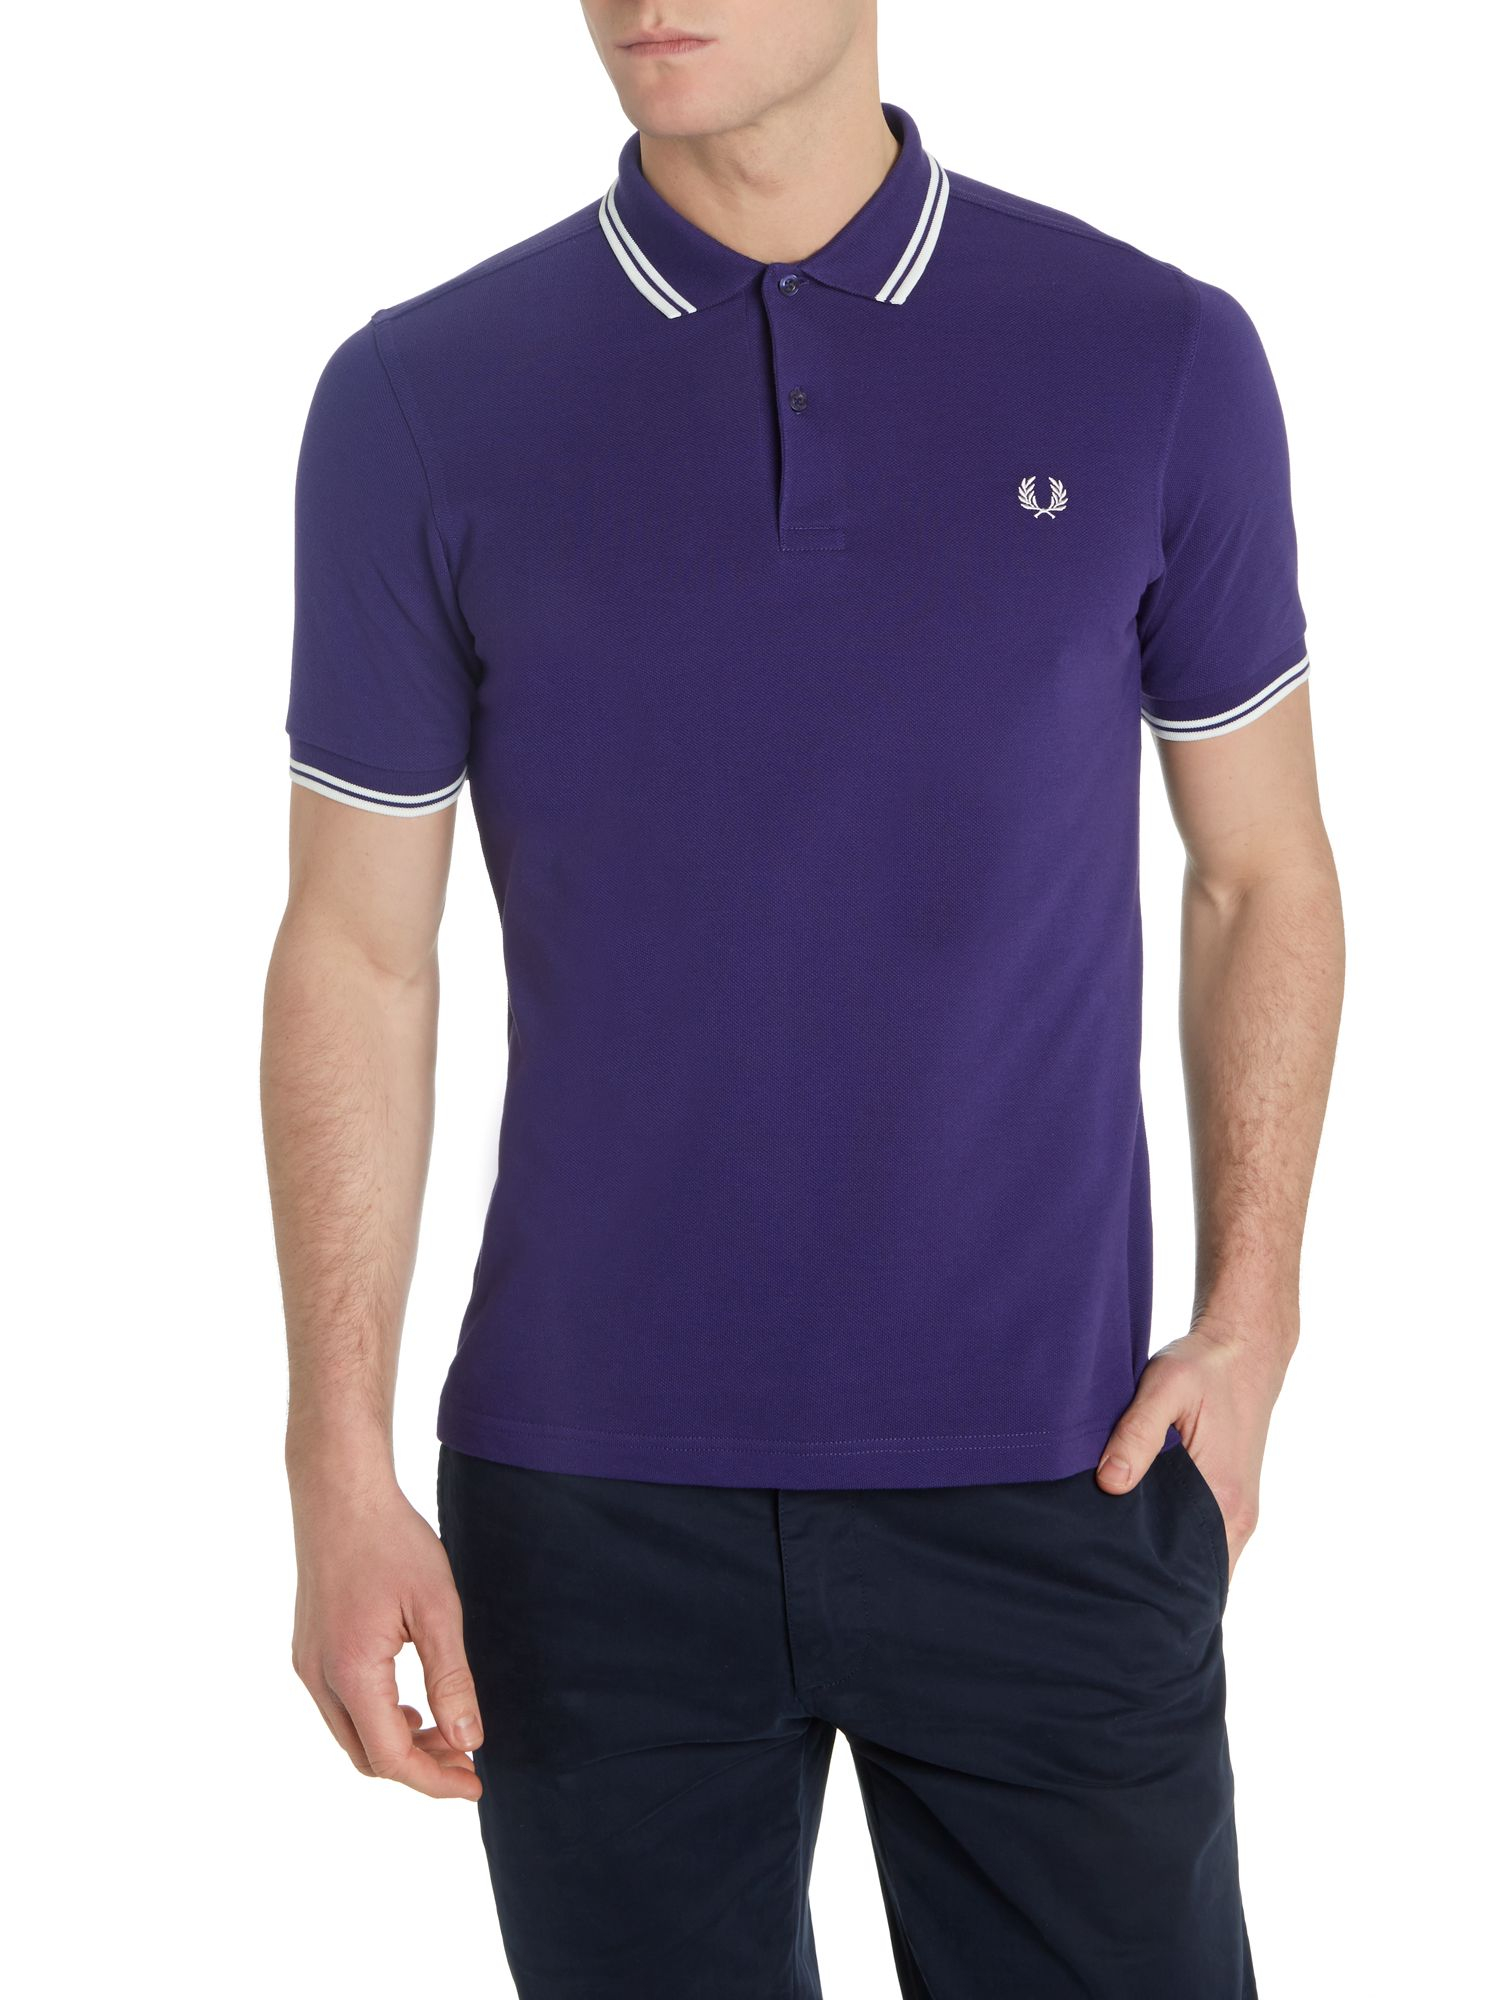 Fred Perry Classic Slim Fit Twin Tipped Polo Shirt In Purple For Men Lyst 